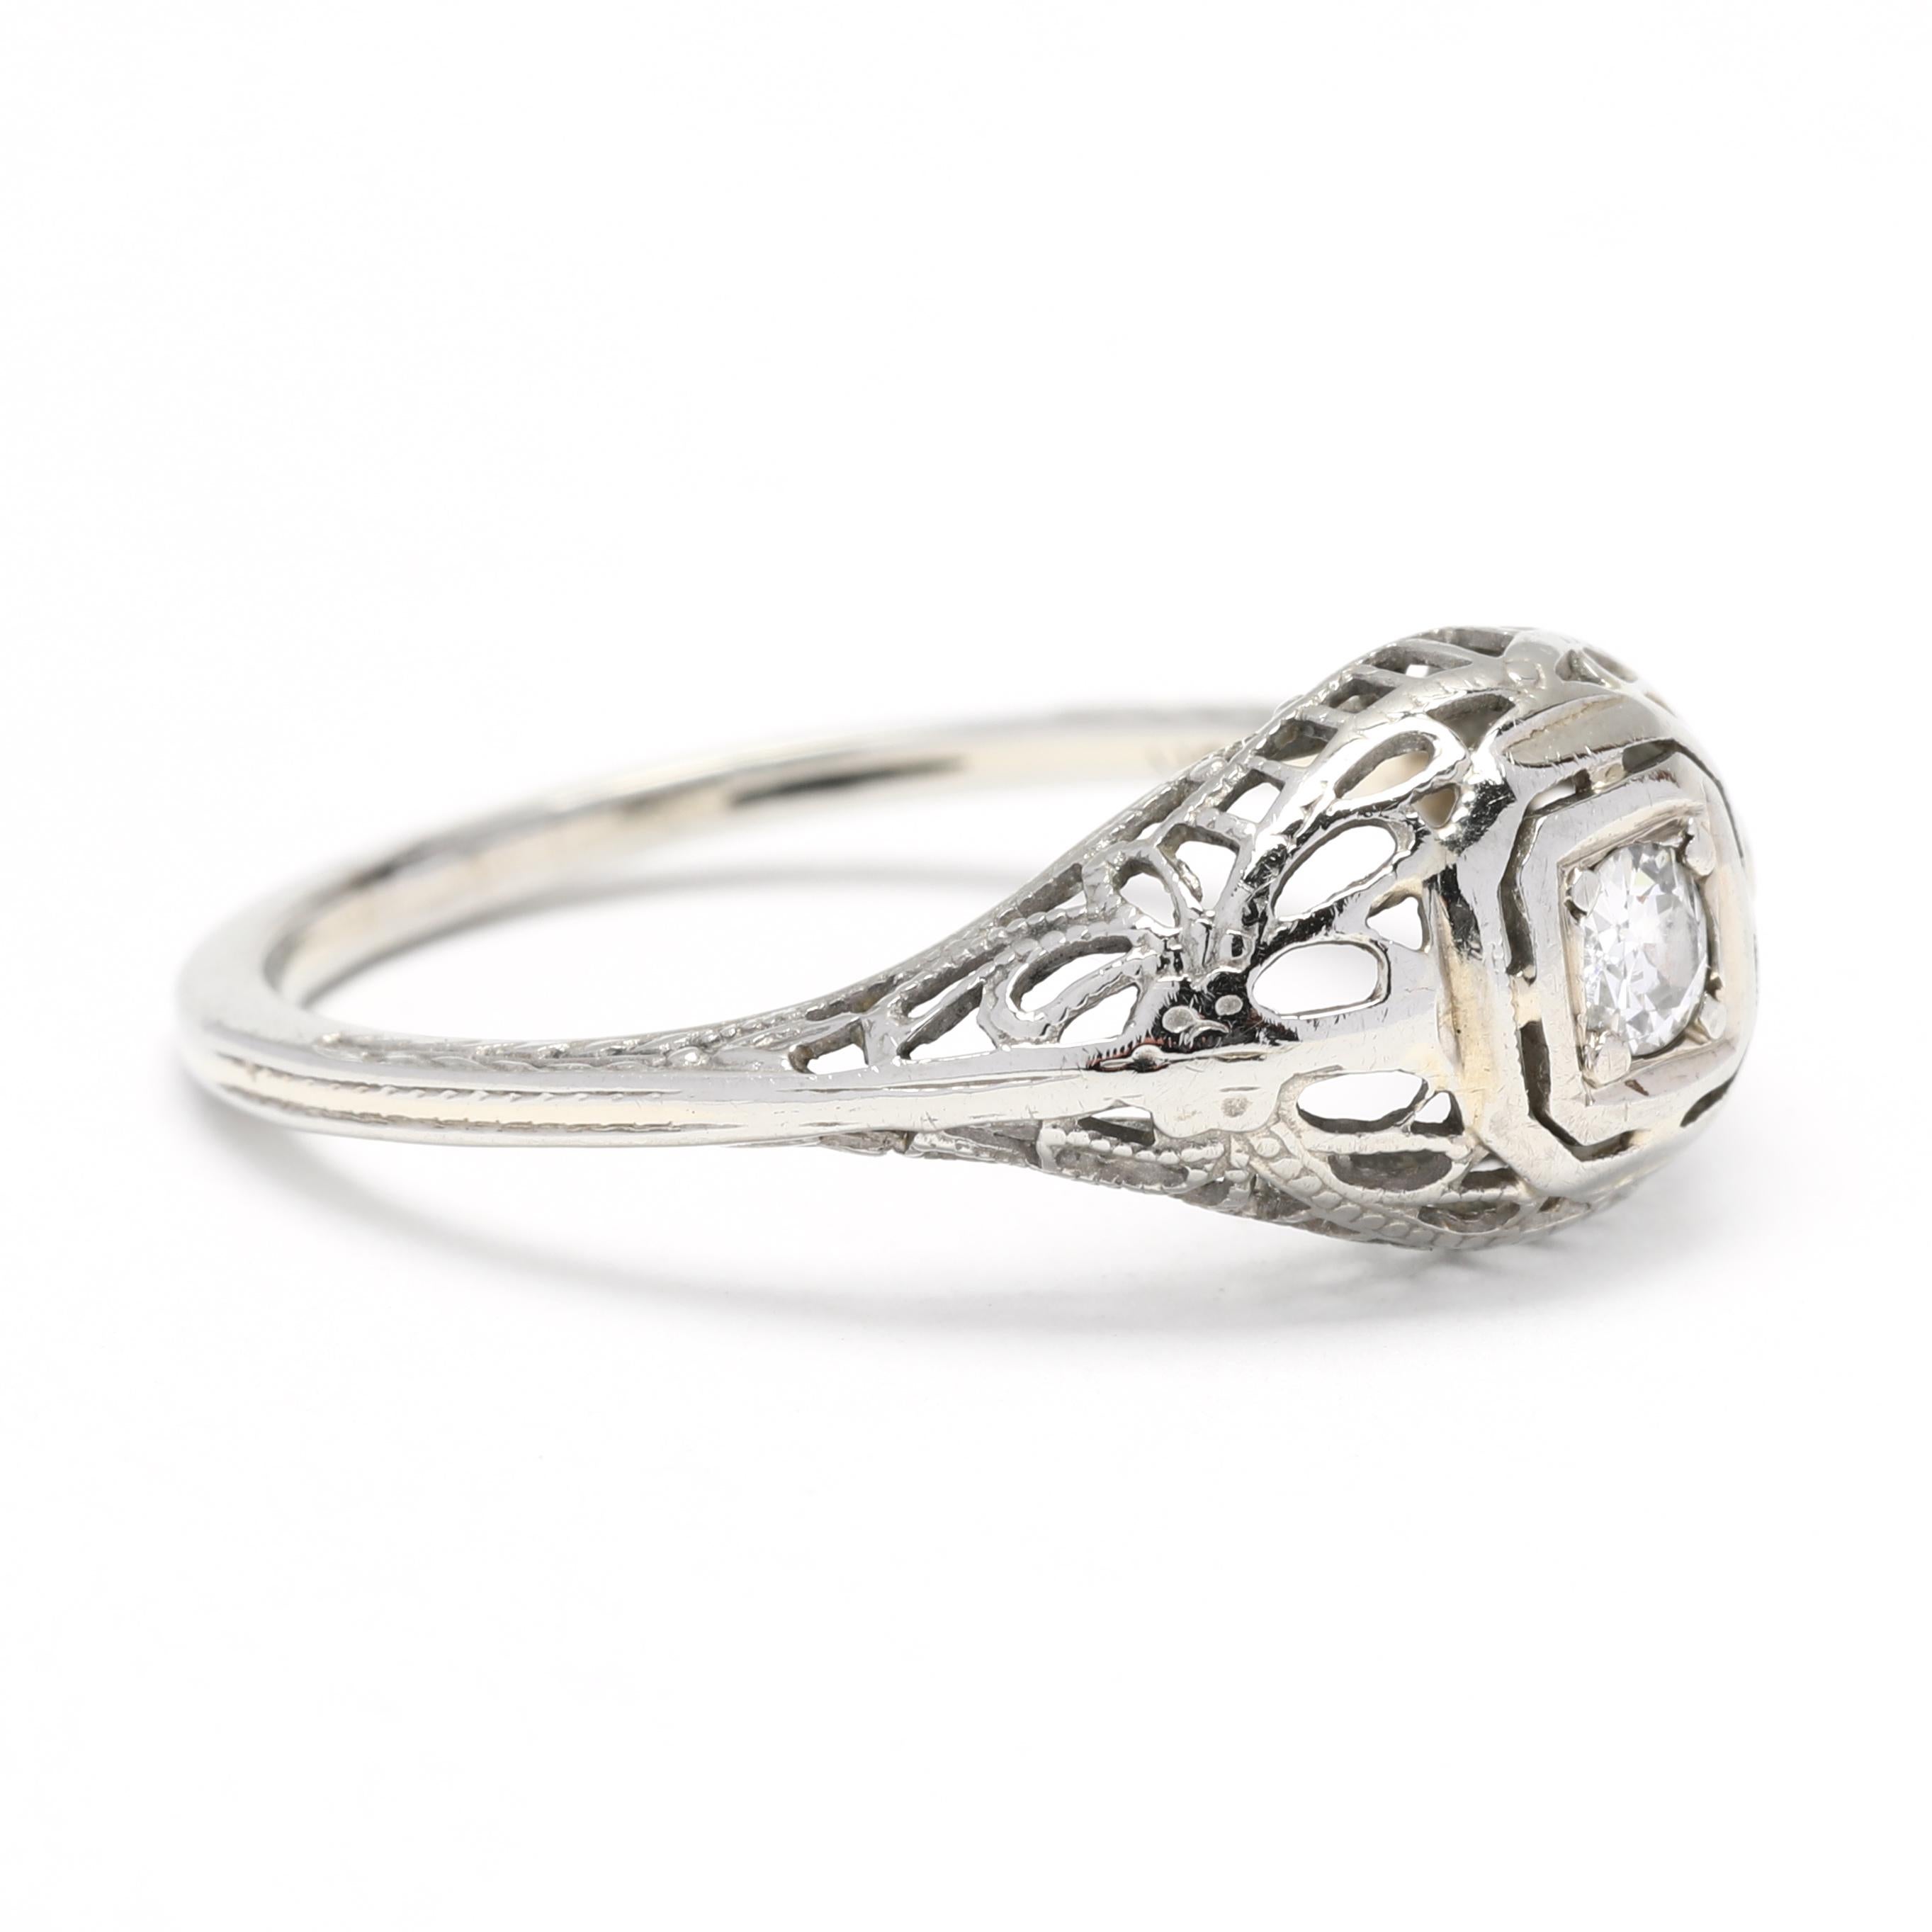 This stunning engagement ring is the perfect way to show your love and commitment. Featuring an enchanting Art Deco style, it is crafted in 18K white gold and set with a .07ct old European cut diamond. Delicate filigree details add an enchanting